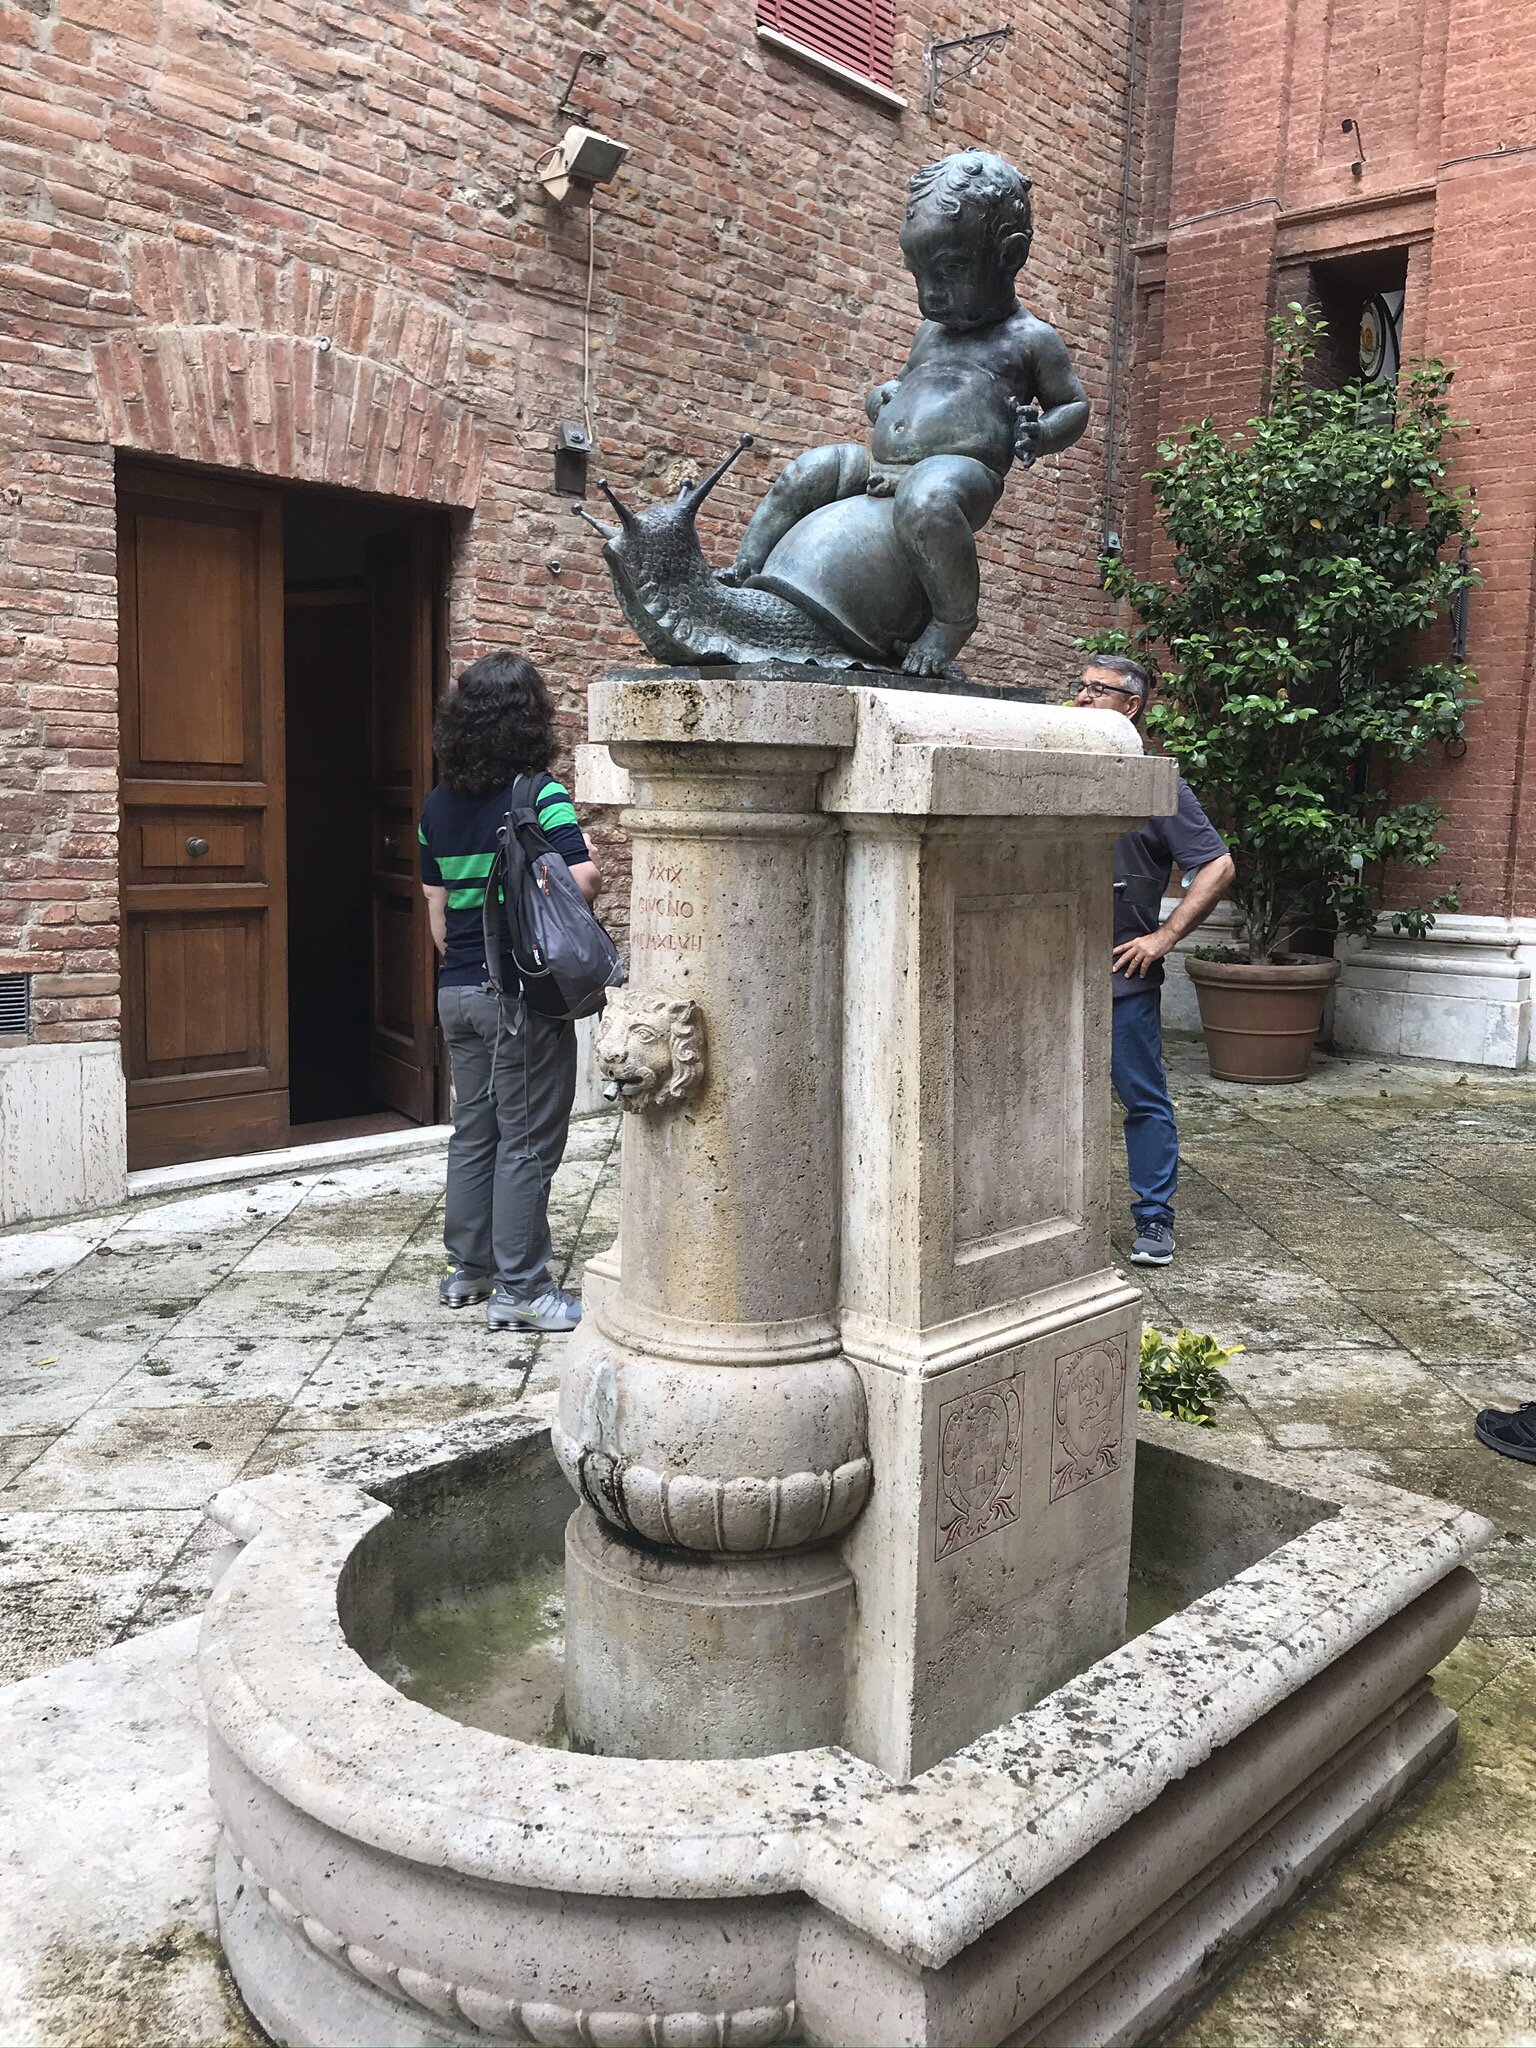 PICTURED: The baptismal font of the Society of the Snail, carved in the 1500s, said to spout wine upon the contrada’s victory in the Palio. A friend told me that maybe only 30% of Siena’s population has not been baptized in one of these fonts.